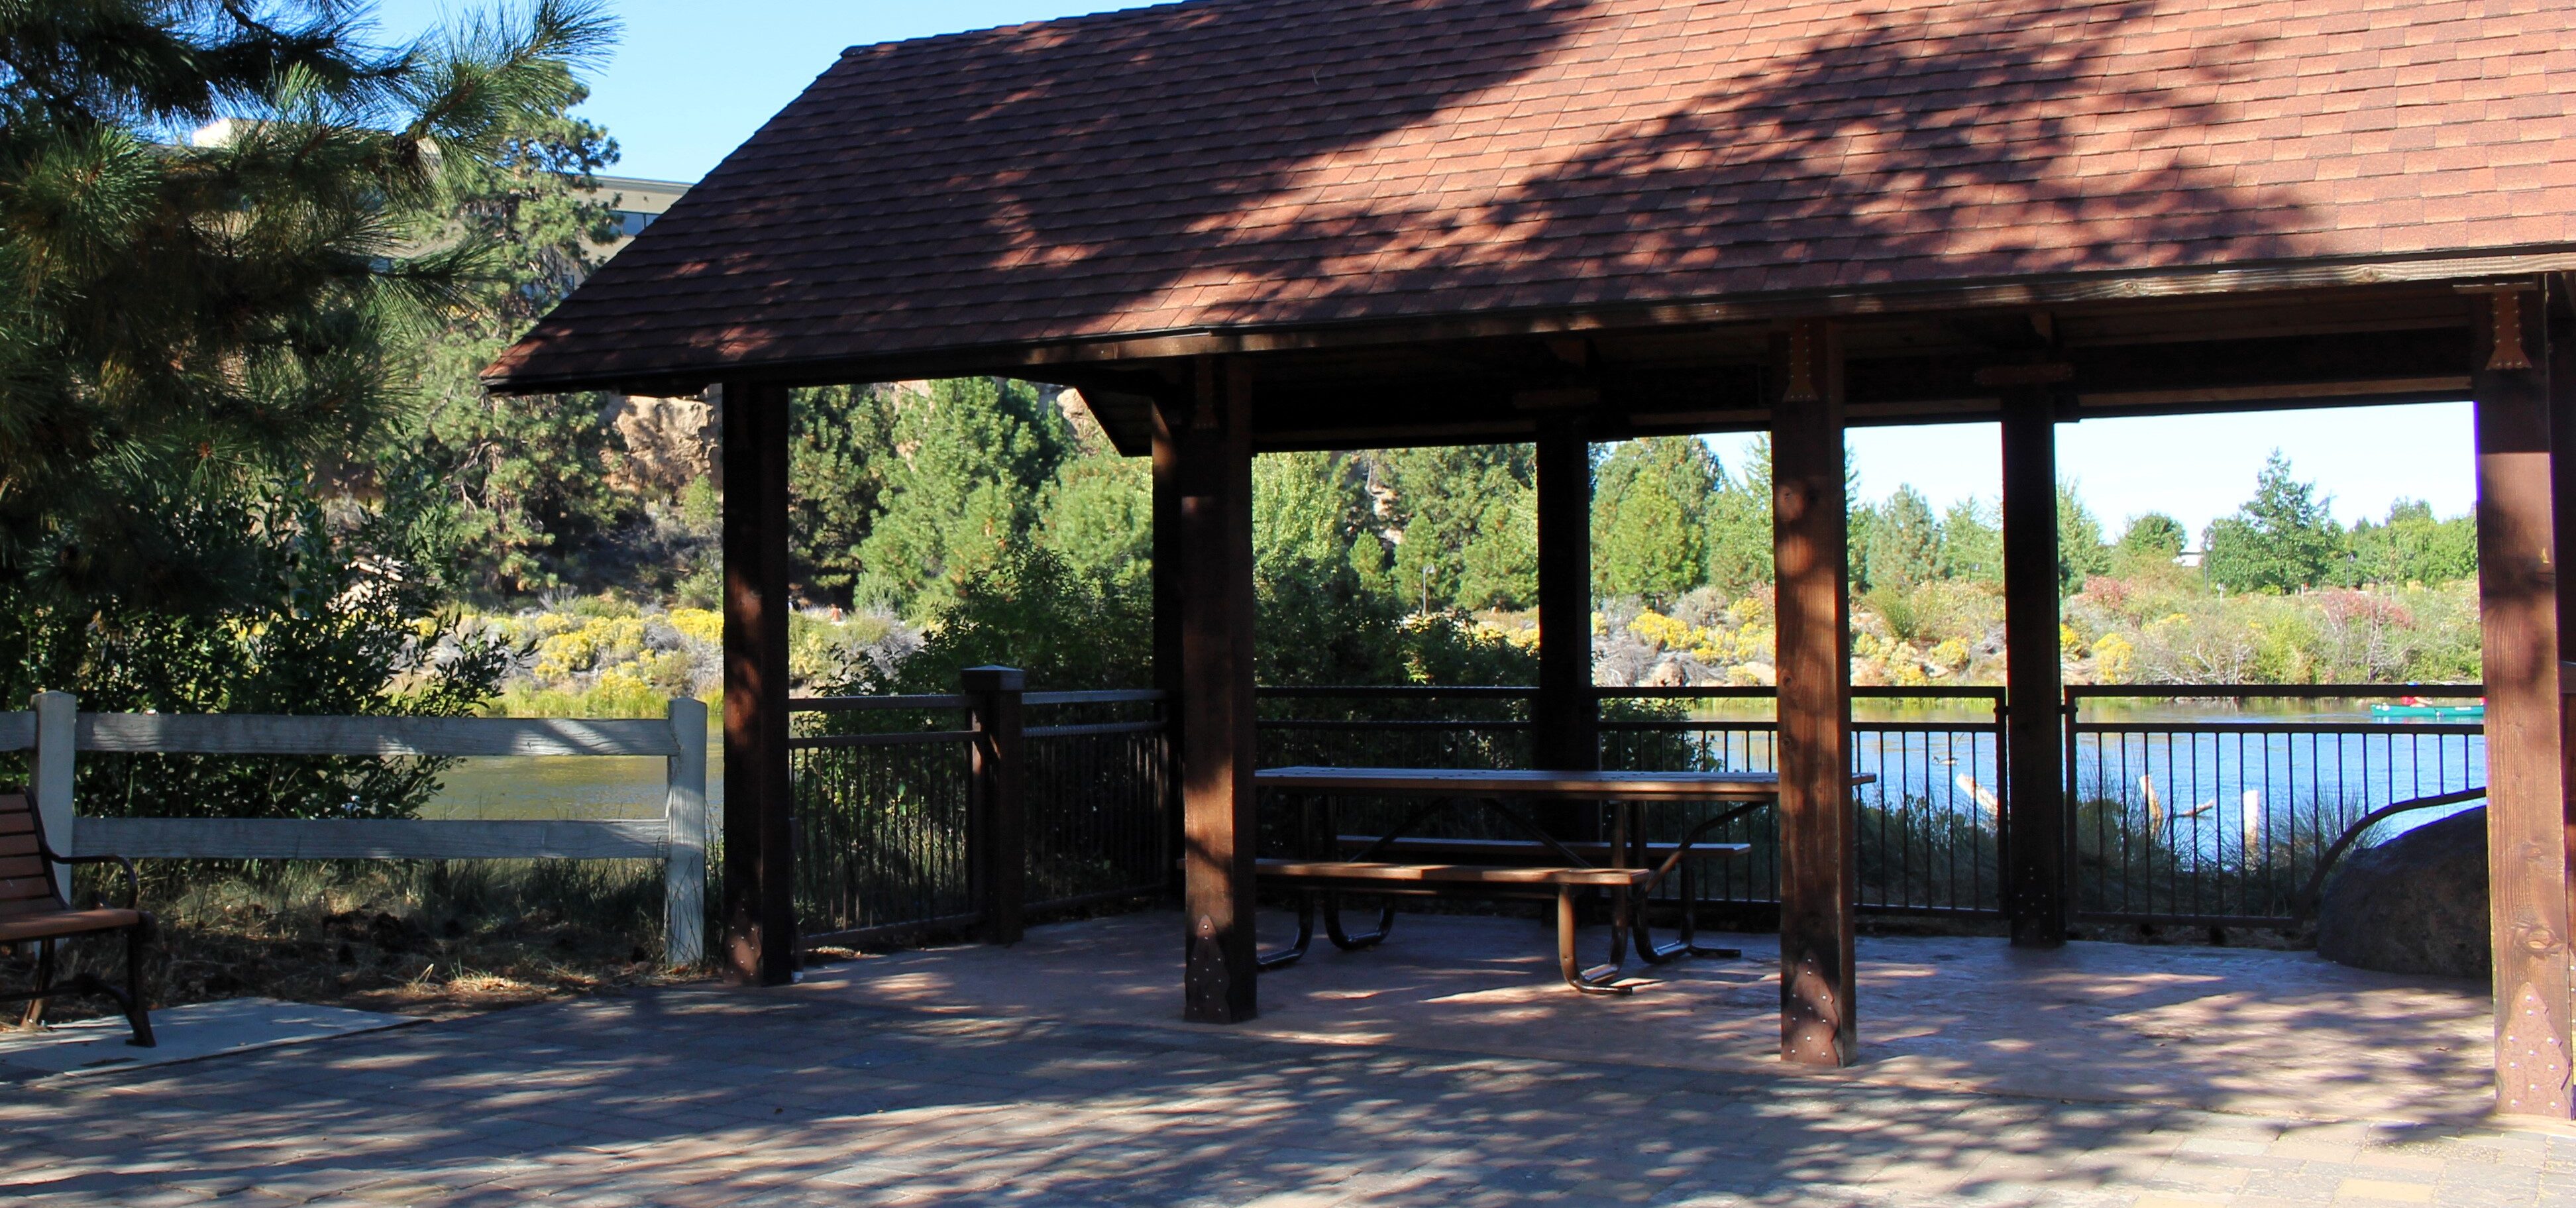 the viewing shelter along the river at farewell bend park